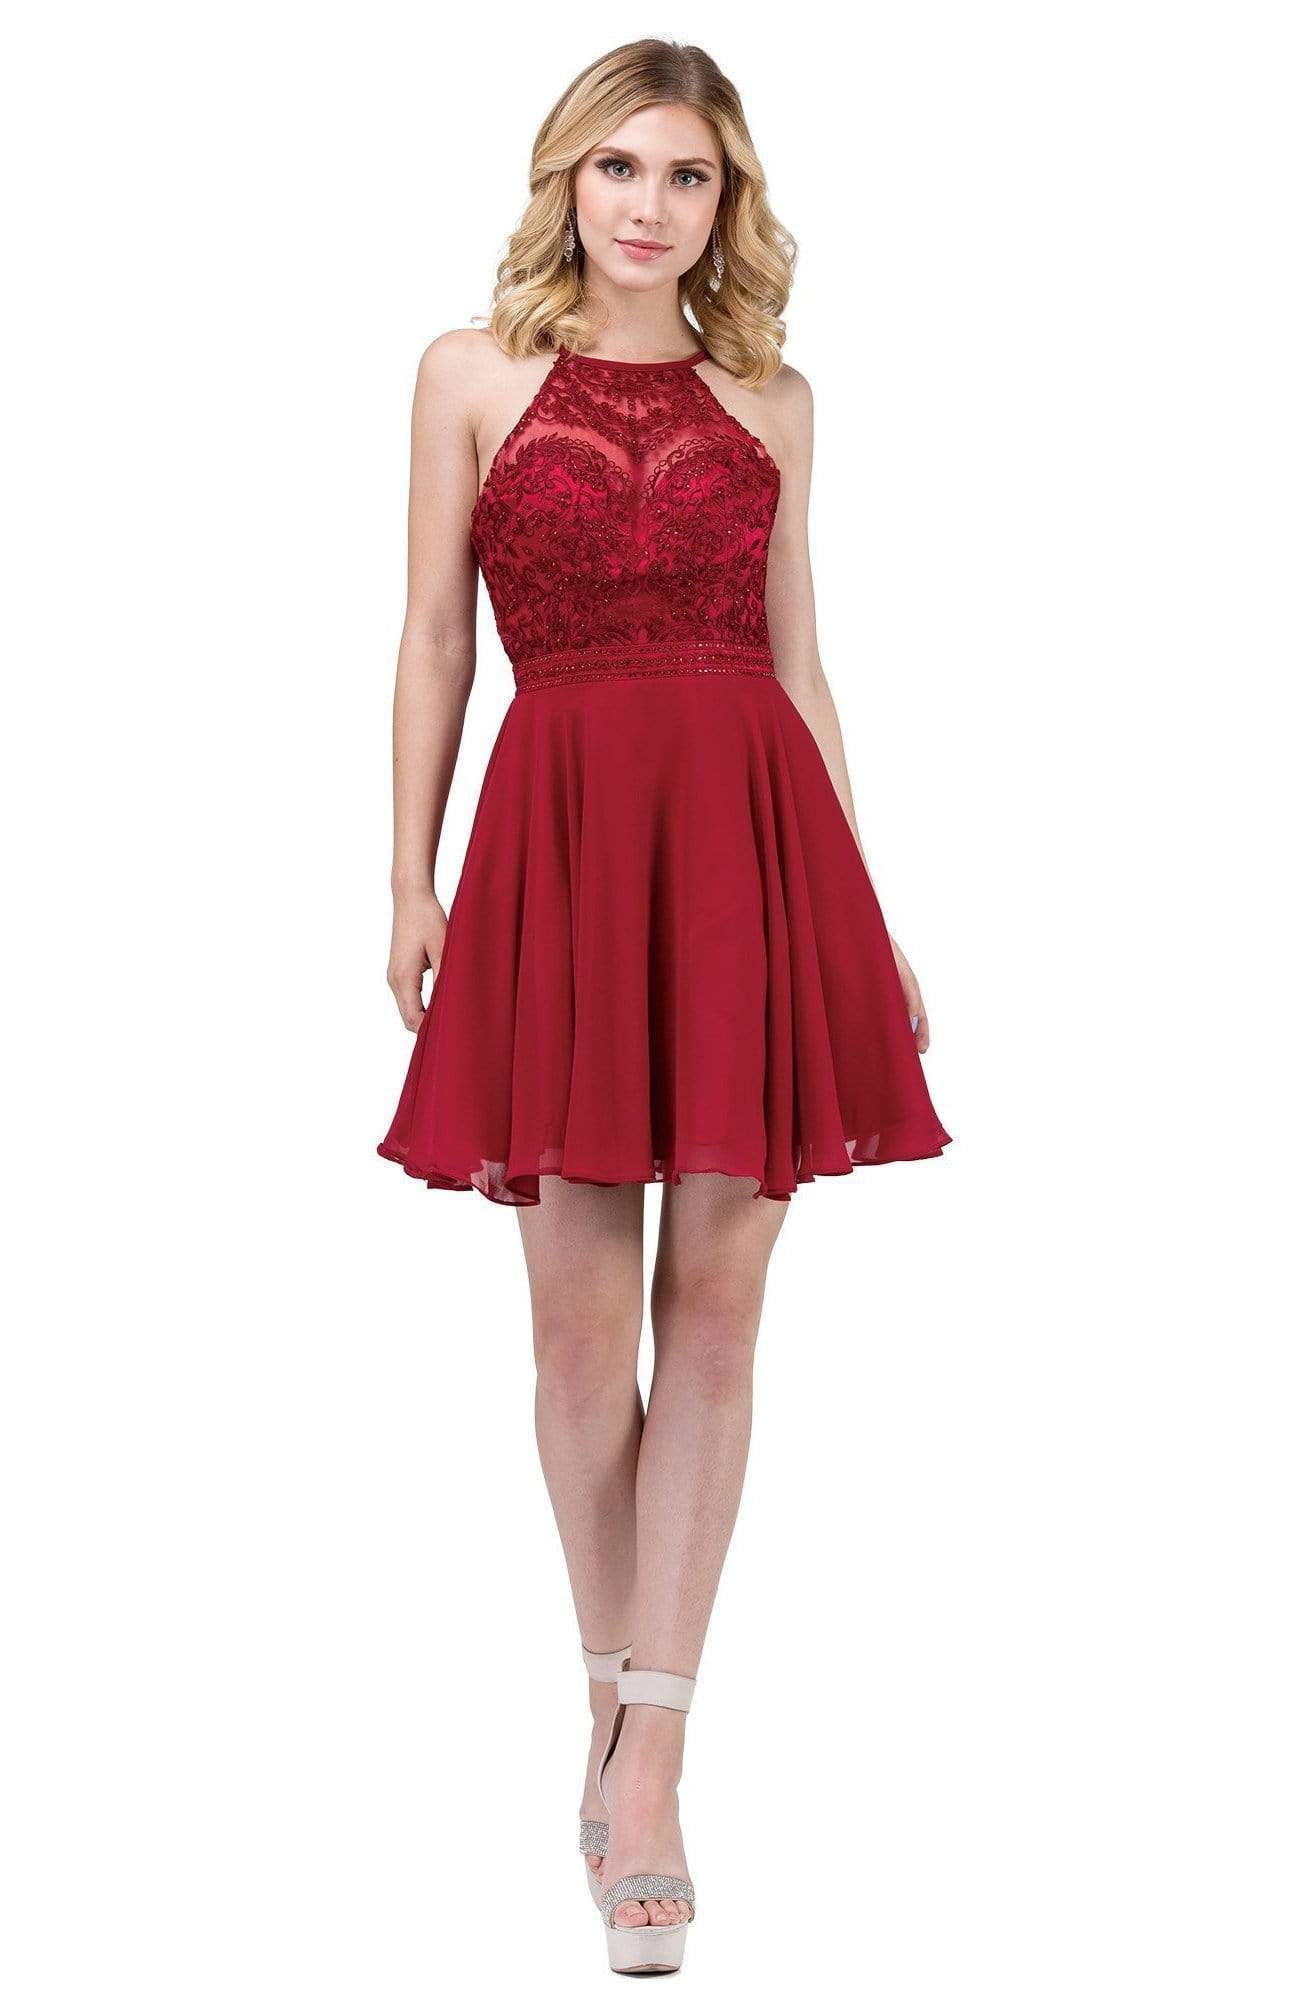 Dancing Queen - 3008 High Halter Embroidered Lace Homecoming Dress